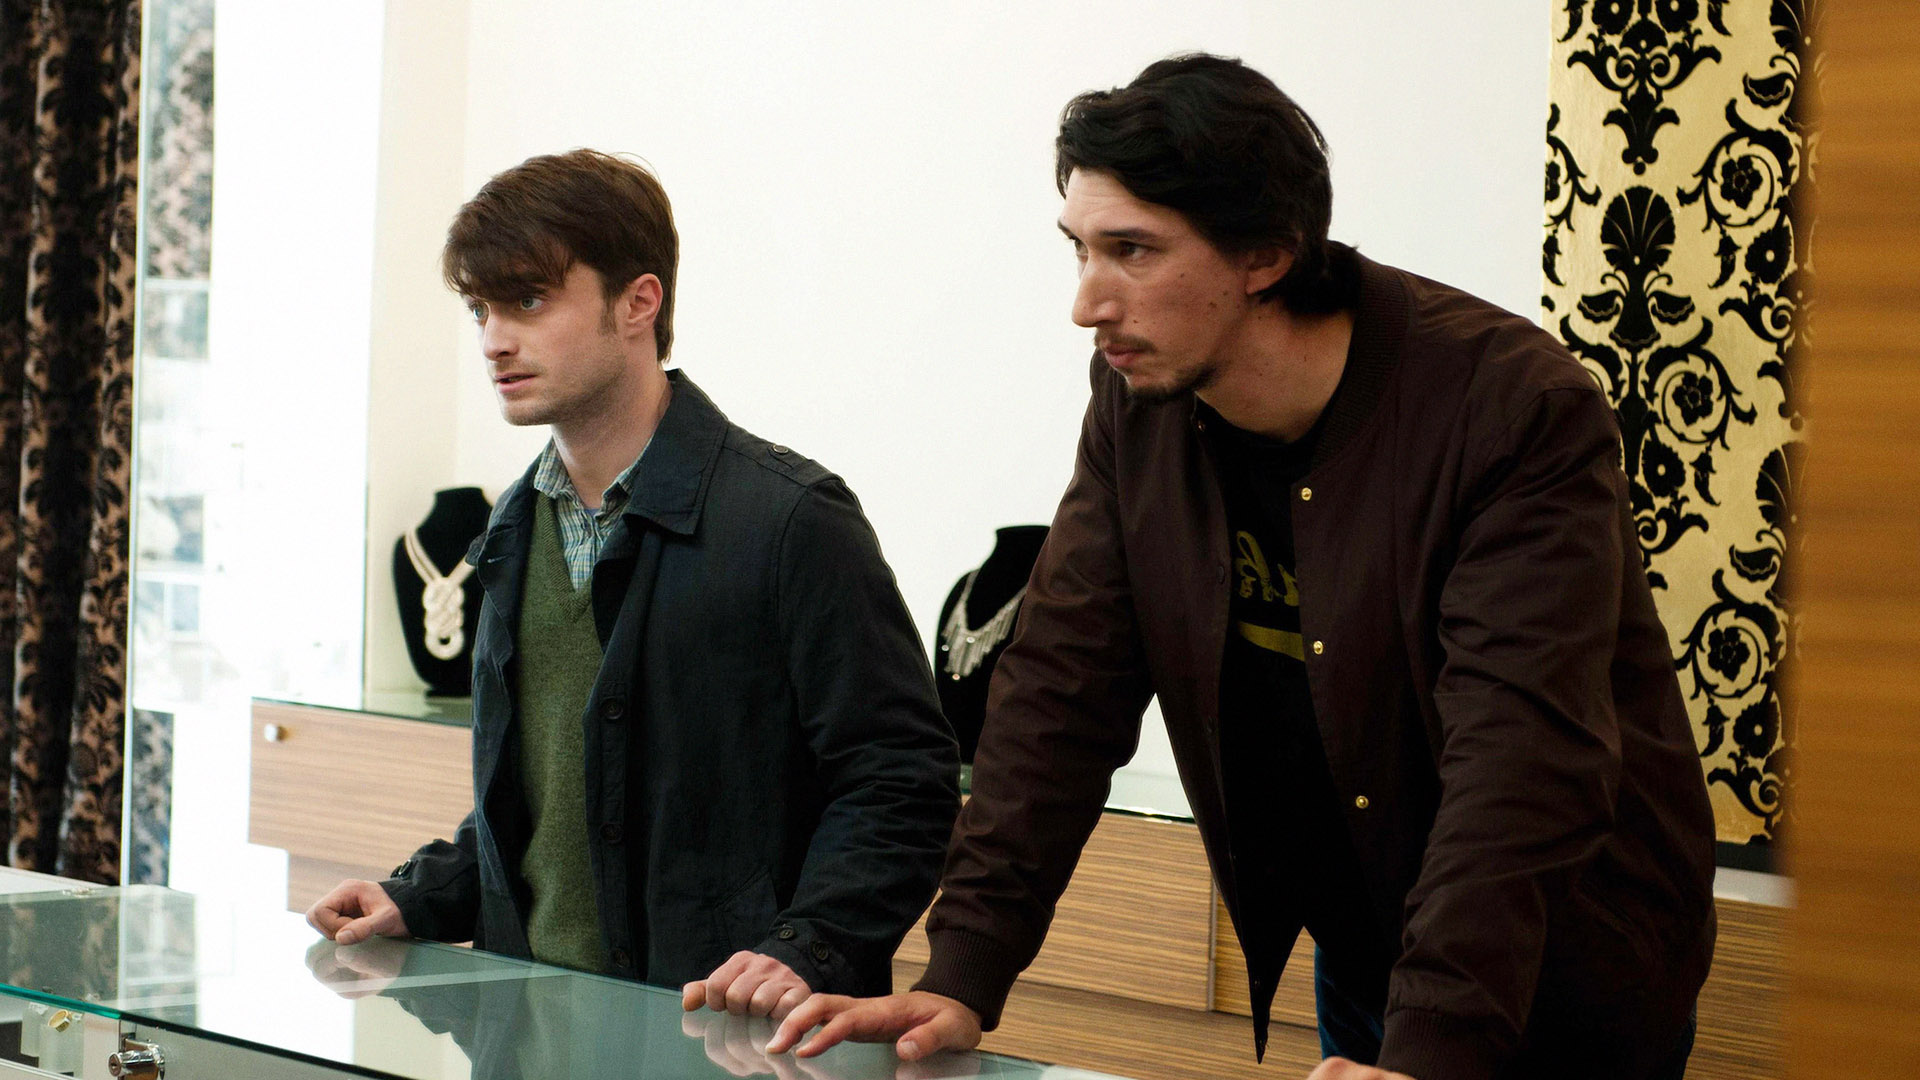 Daniel Radcliffe & Adam Driver Had the Best Bromance in $8M Rom-Com You Missed